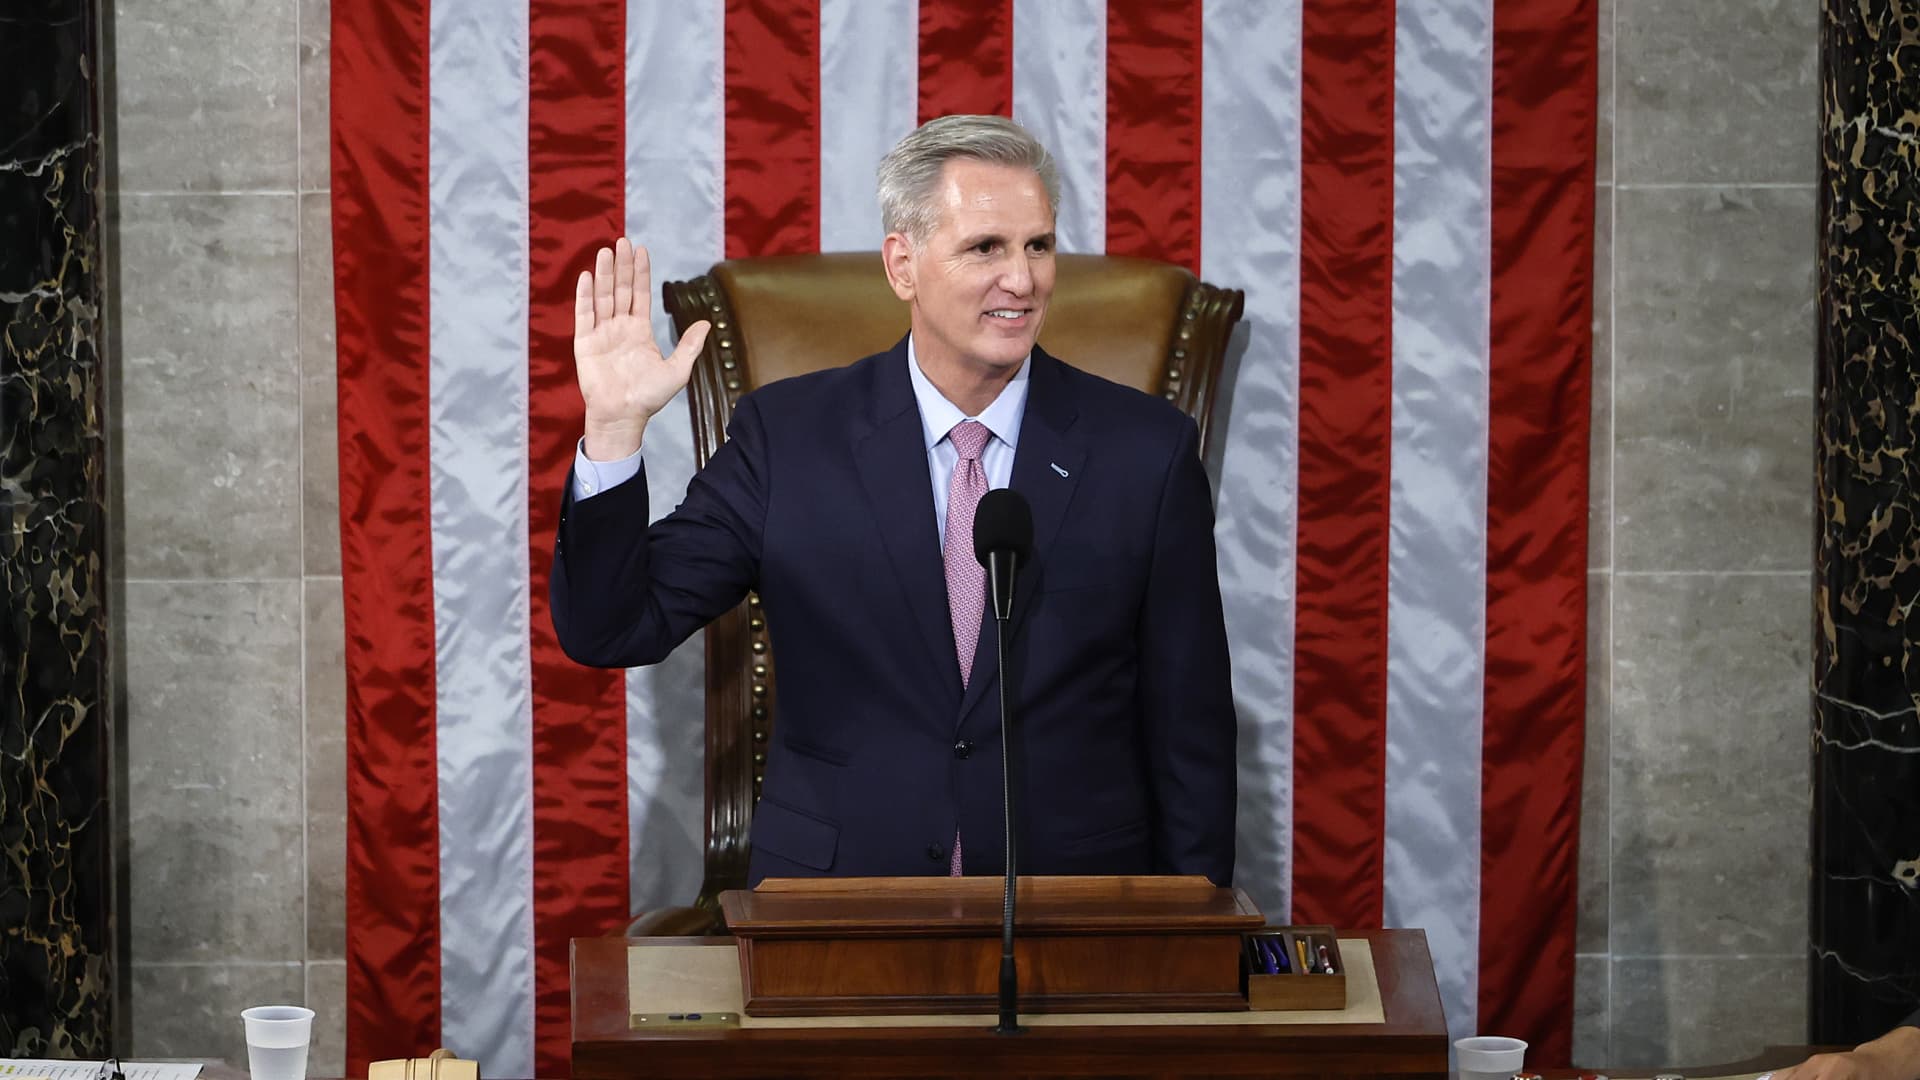 U.S. Speaker of the House Kevin McCarthy (R-CA) is sworn-in after being elected as Speaker in the House Chamber at the U.S. Capitol Building on January 07, 2023 in Washington, DC. 